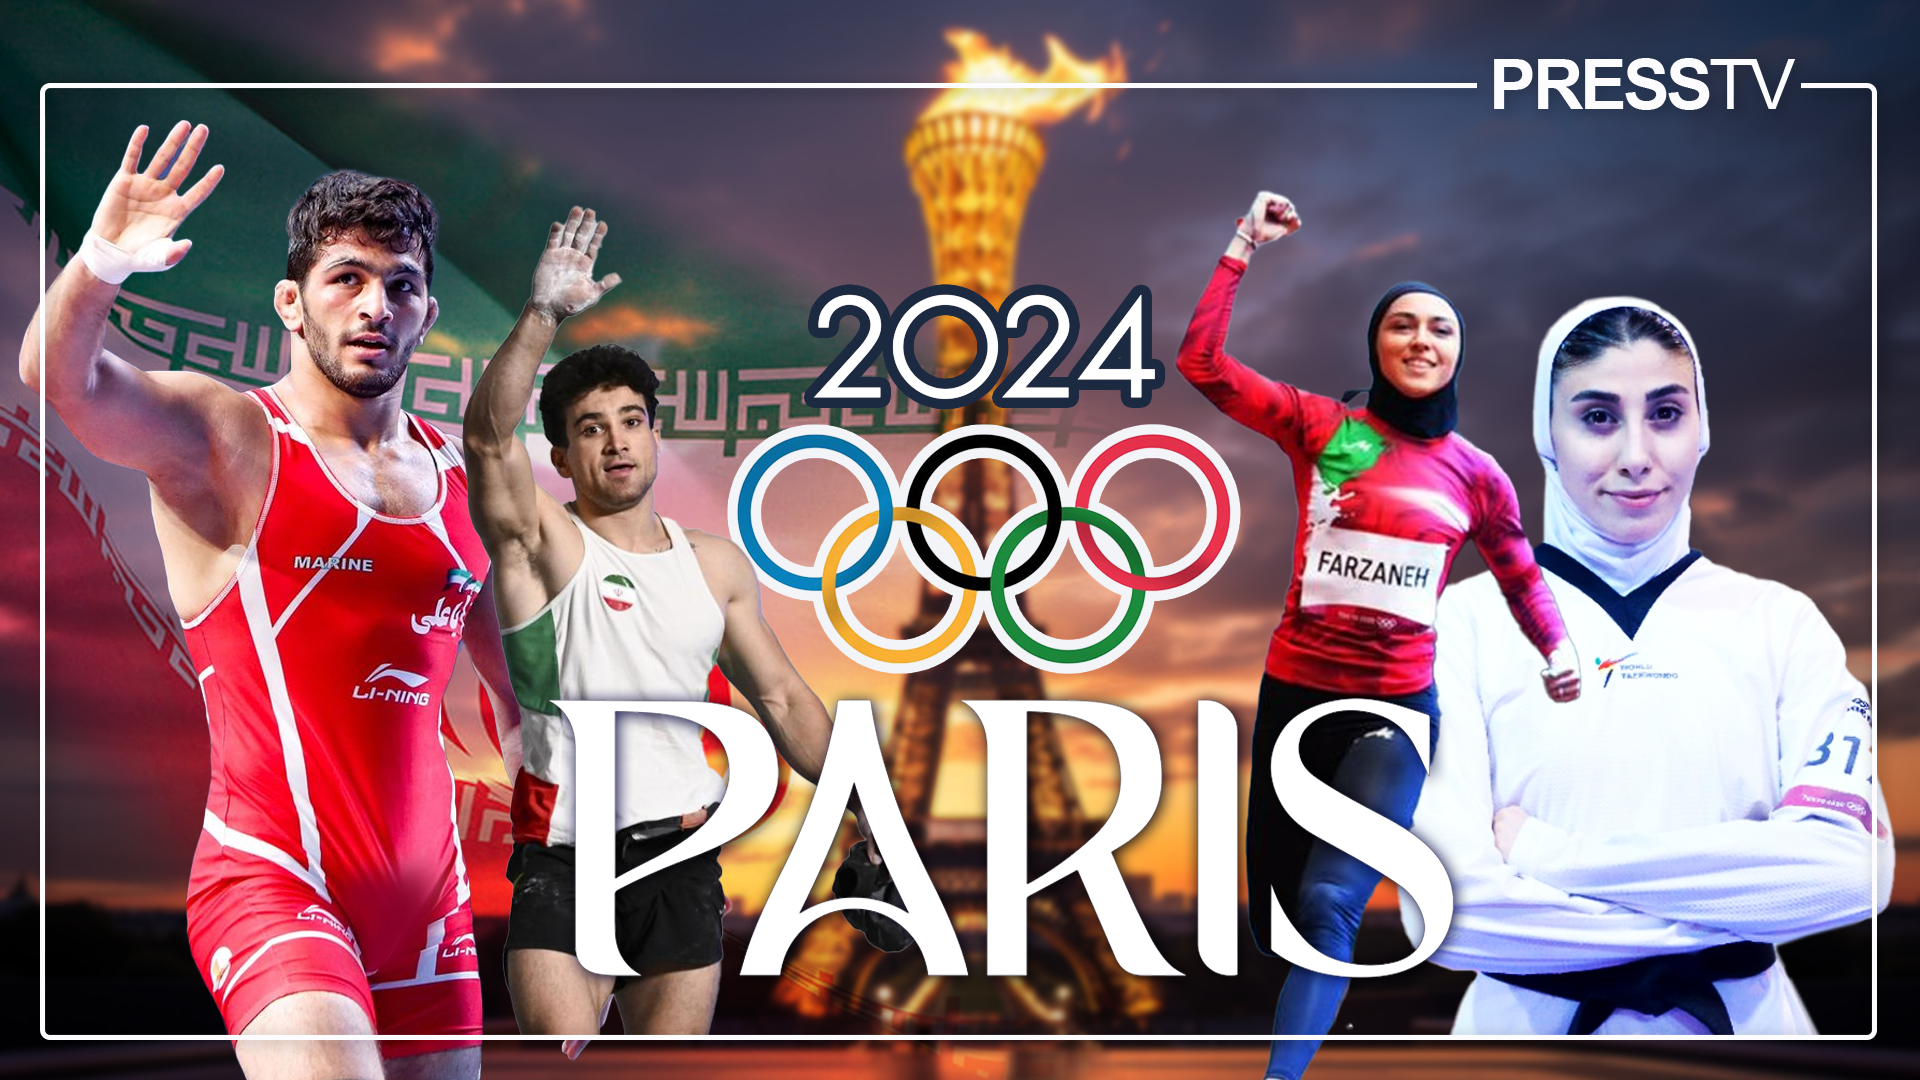 Islamic Republic of Iran at Paris 2024 Olympics: Everything you need to know